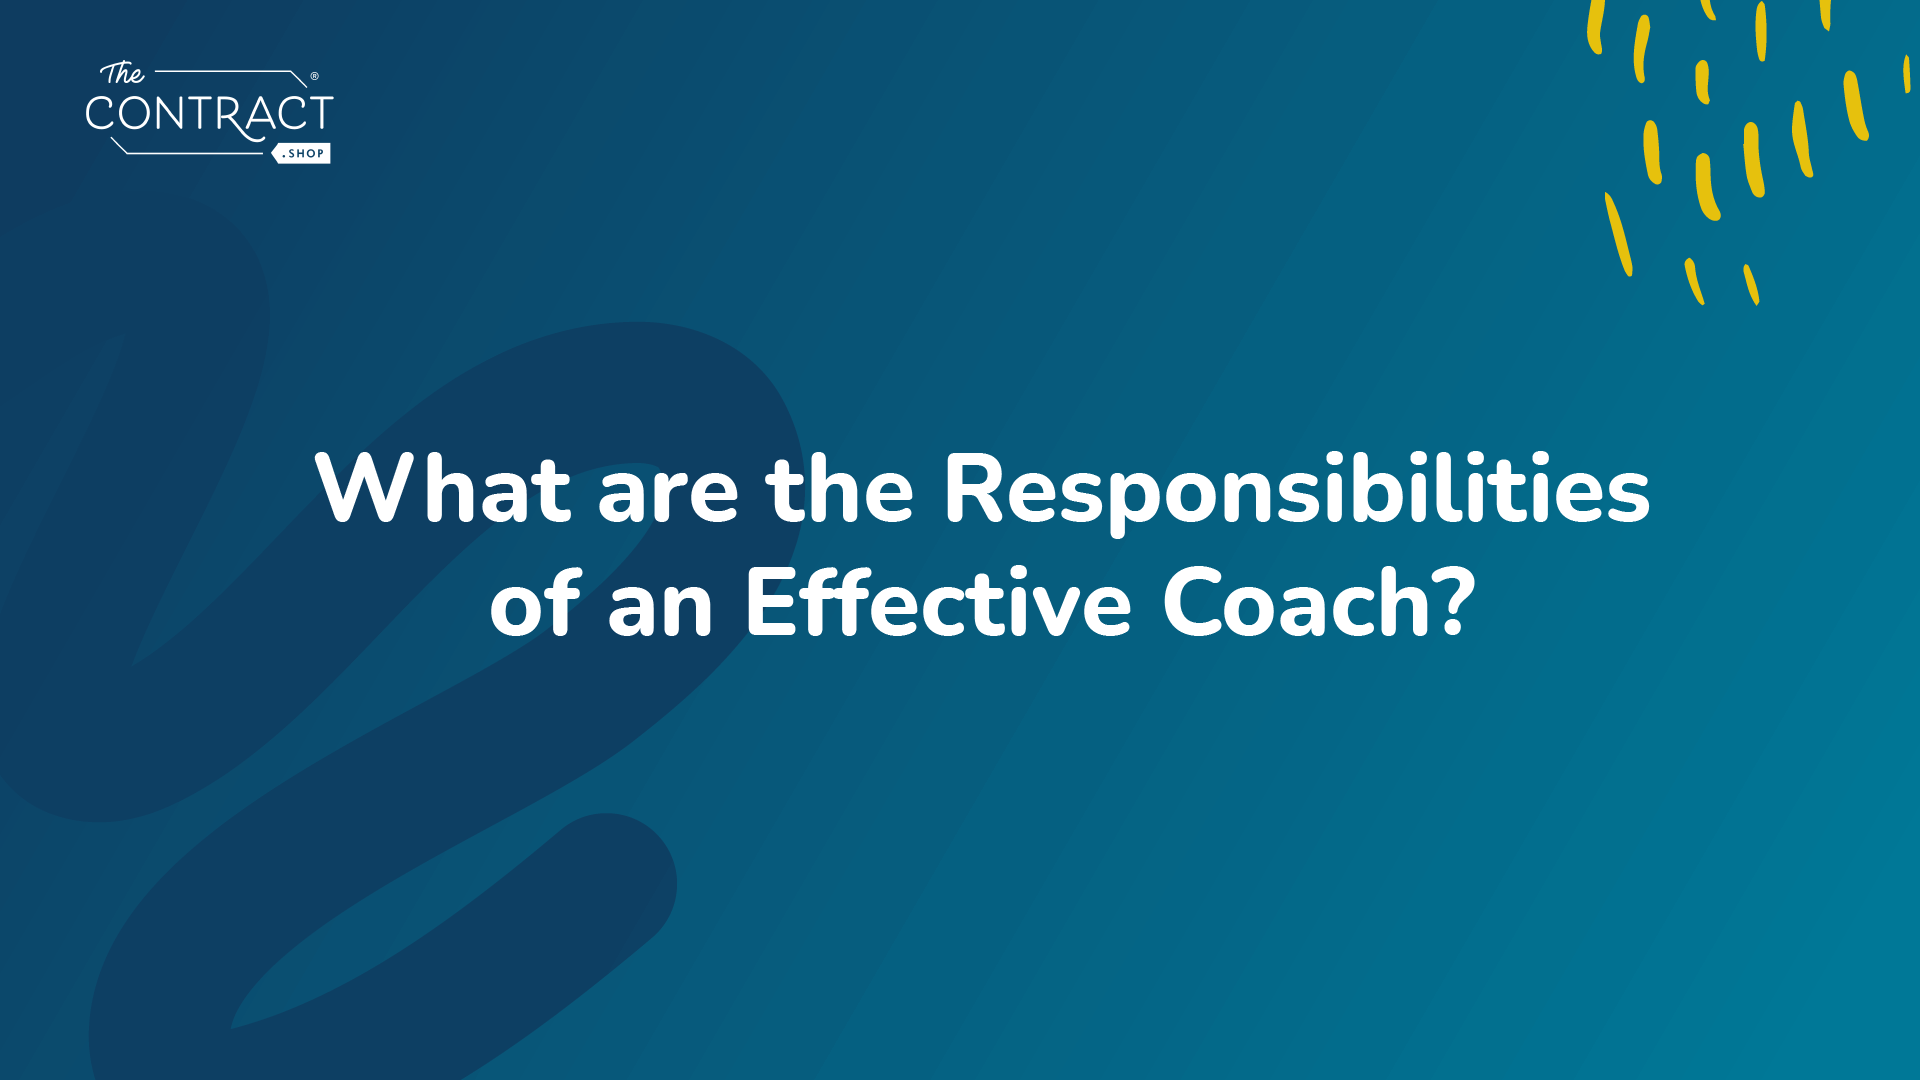 What are the Responsibilities of an Effective Coach?